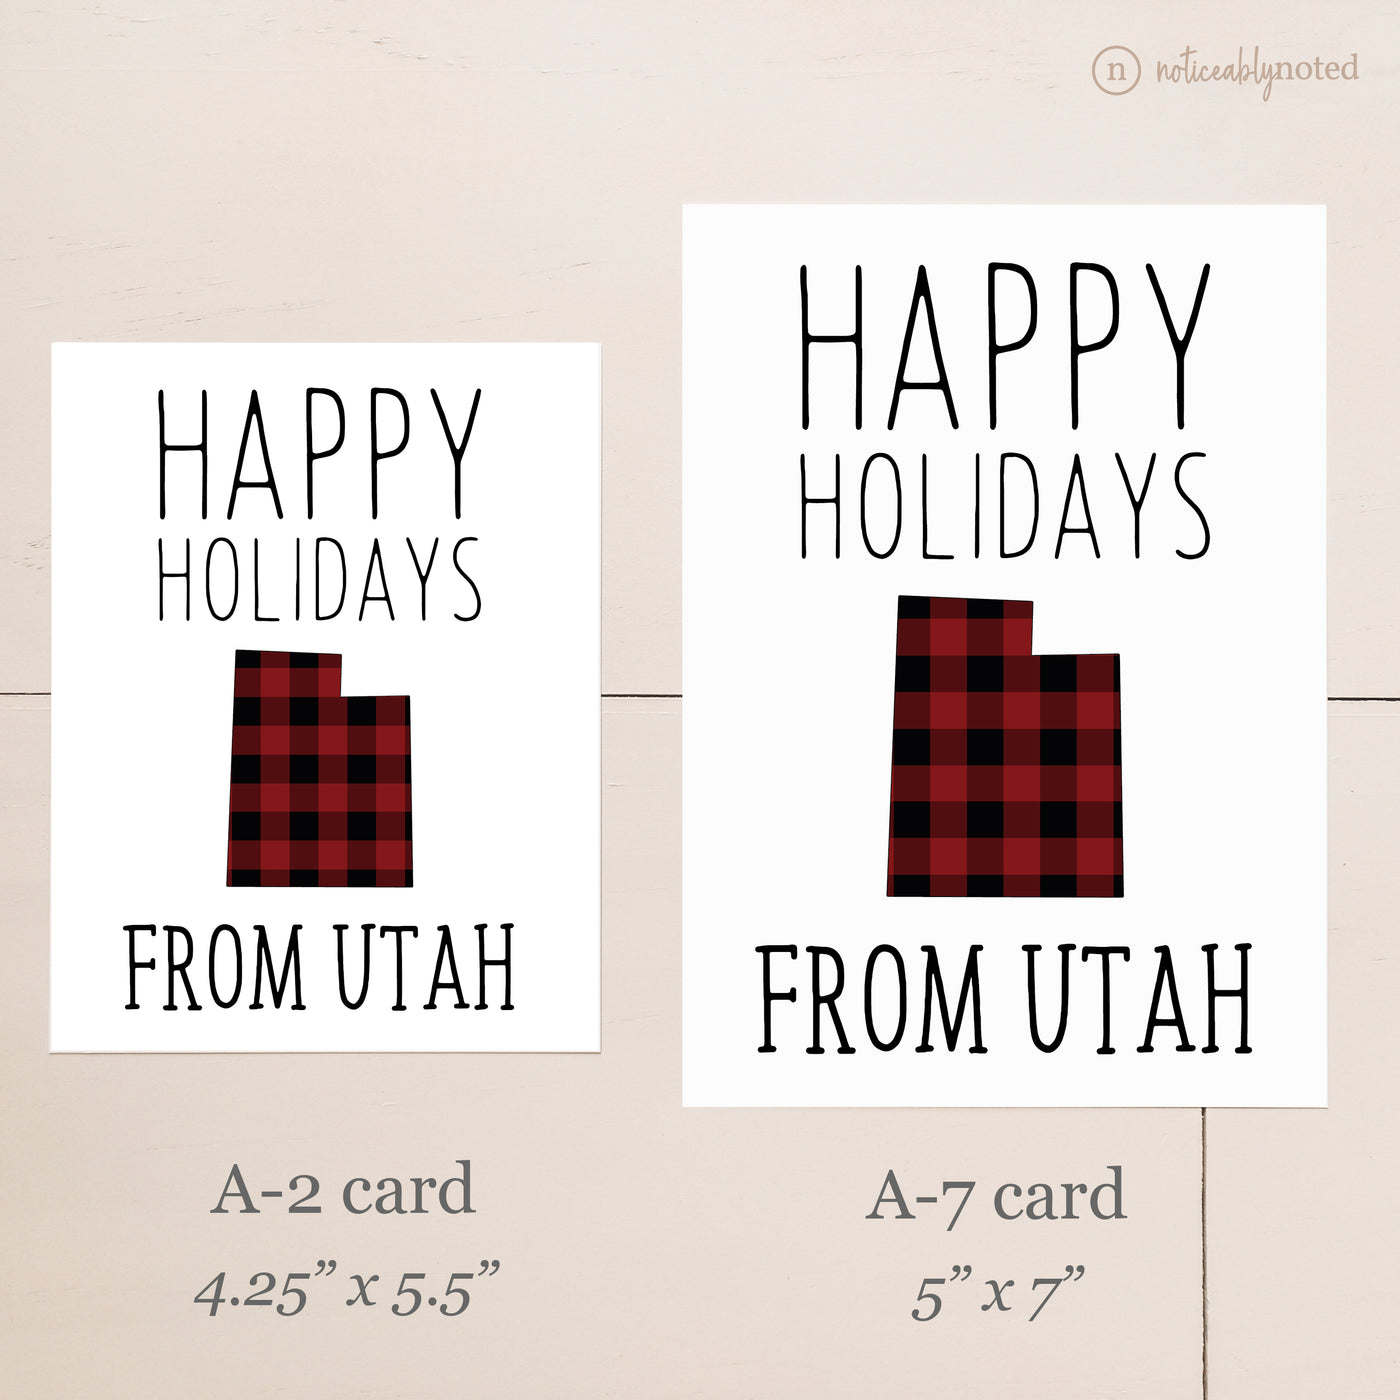 Utah Holiday Card - Card Size Comparison | Noticeably Noted